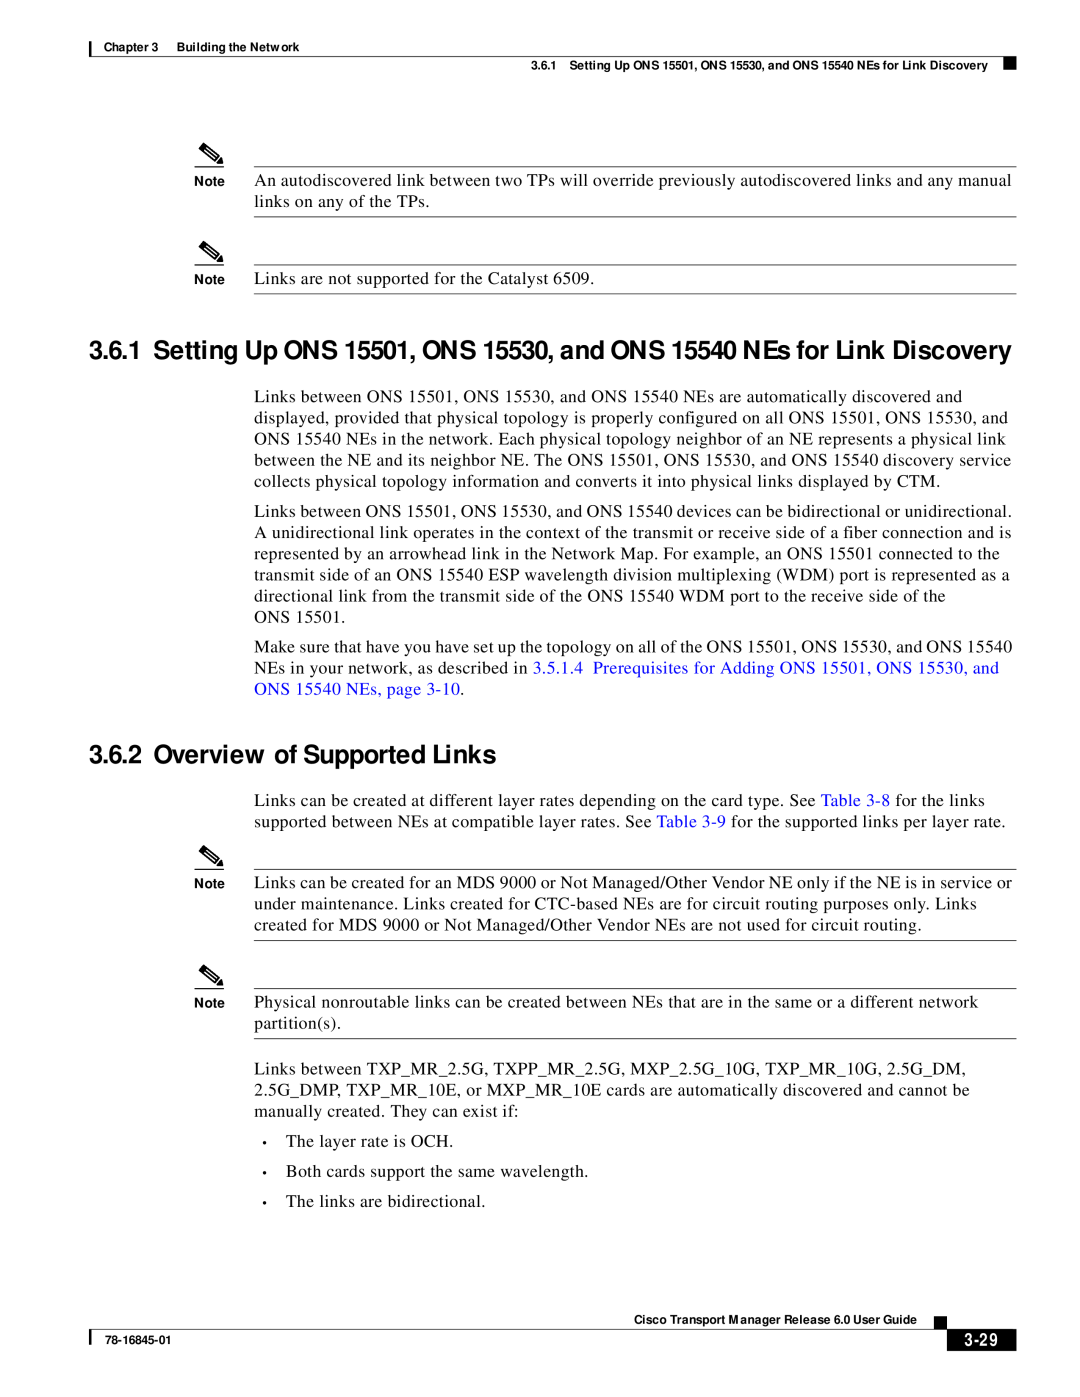 Cisco Systems 78-16845-01 manual Overview of Supported Links, 3-29 